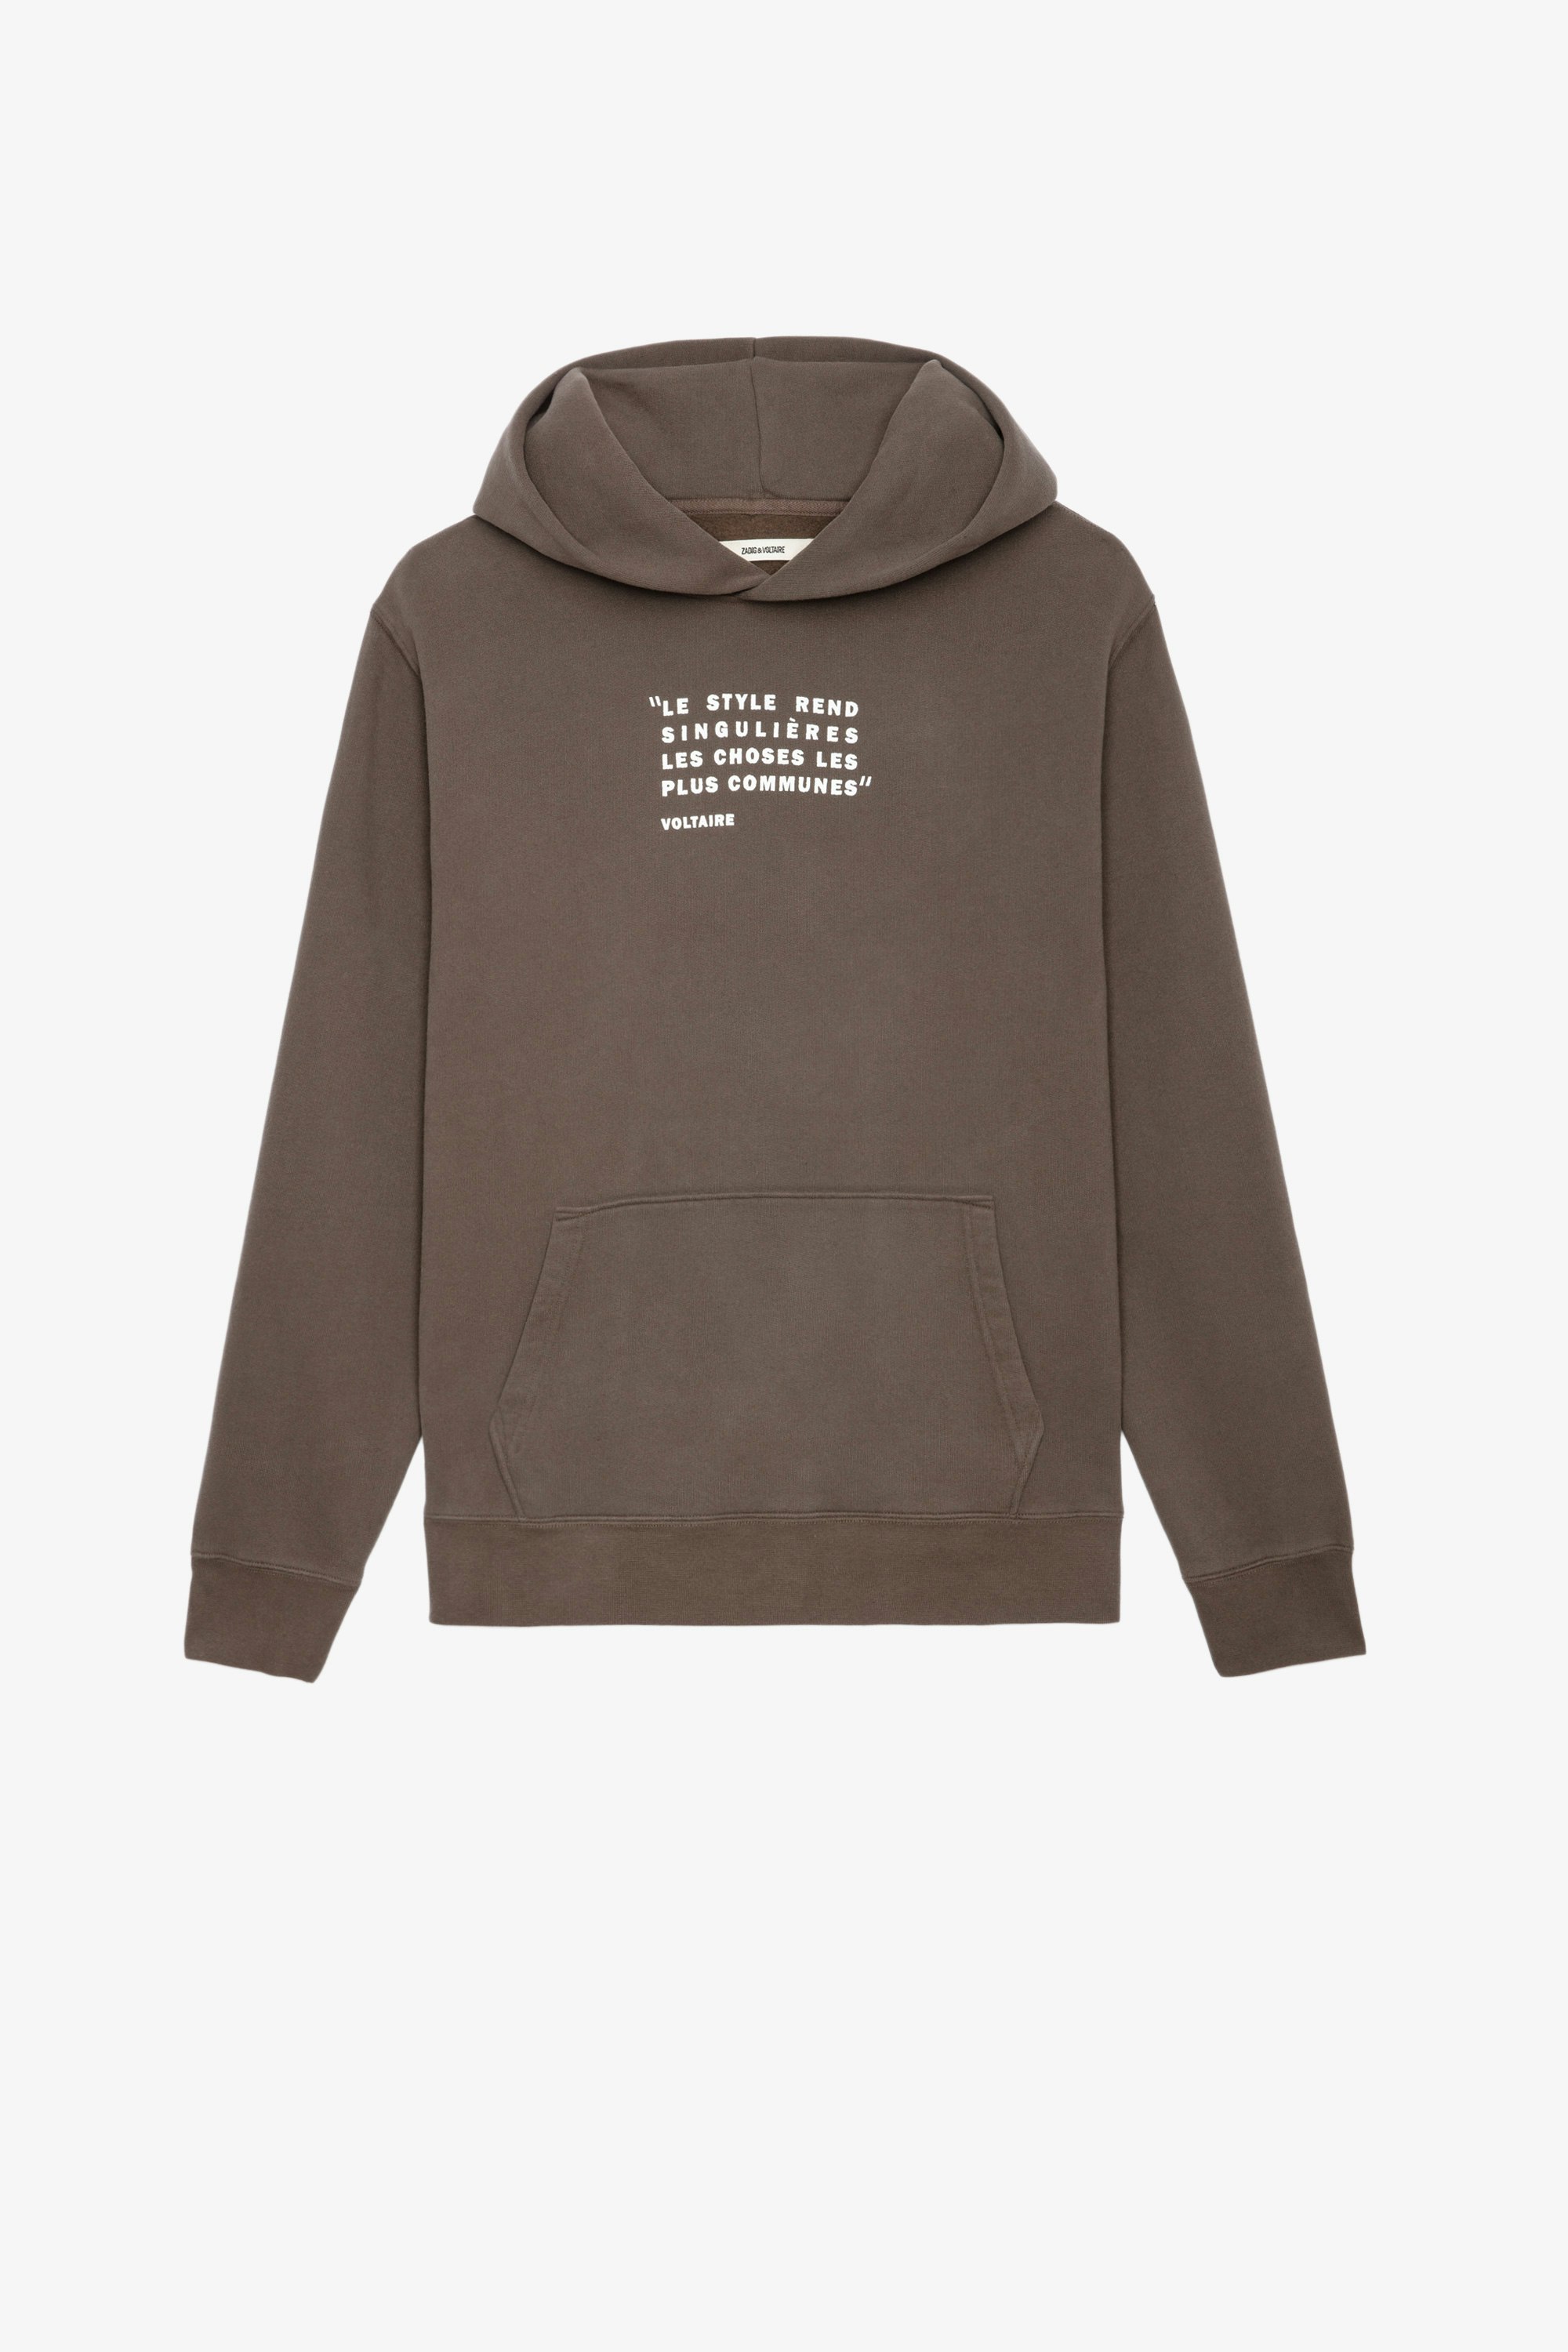 Sanchi Photoprint Sweatshirt Men’s bronze cotton hoodie with printed text and photoprint on the back